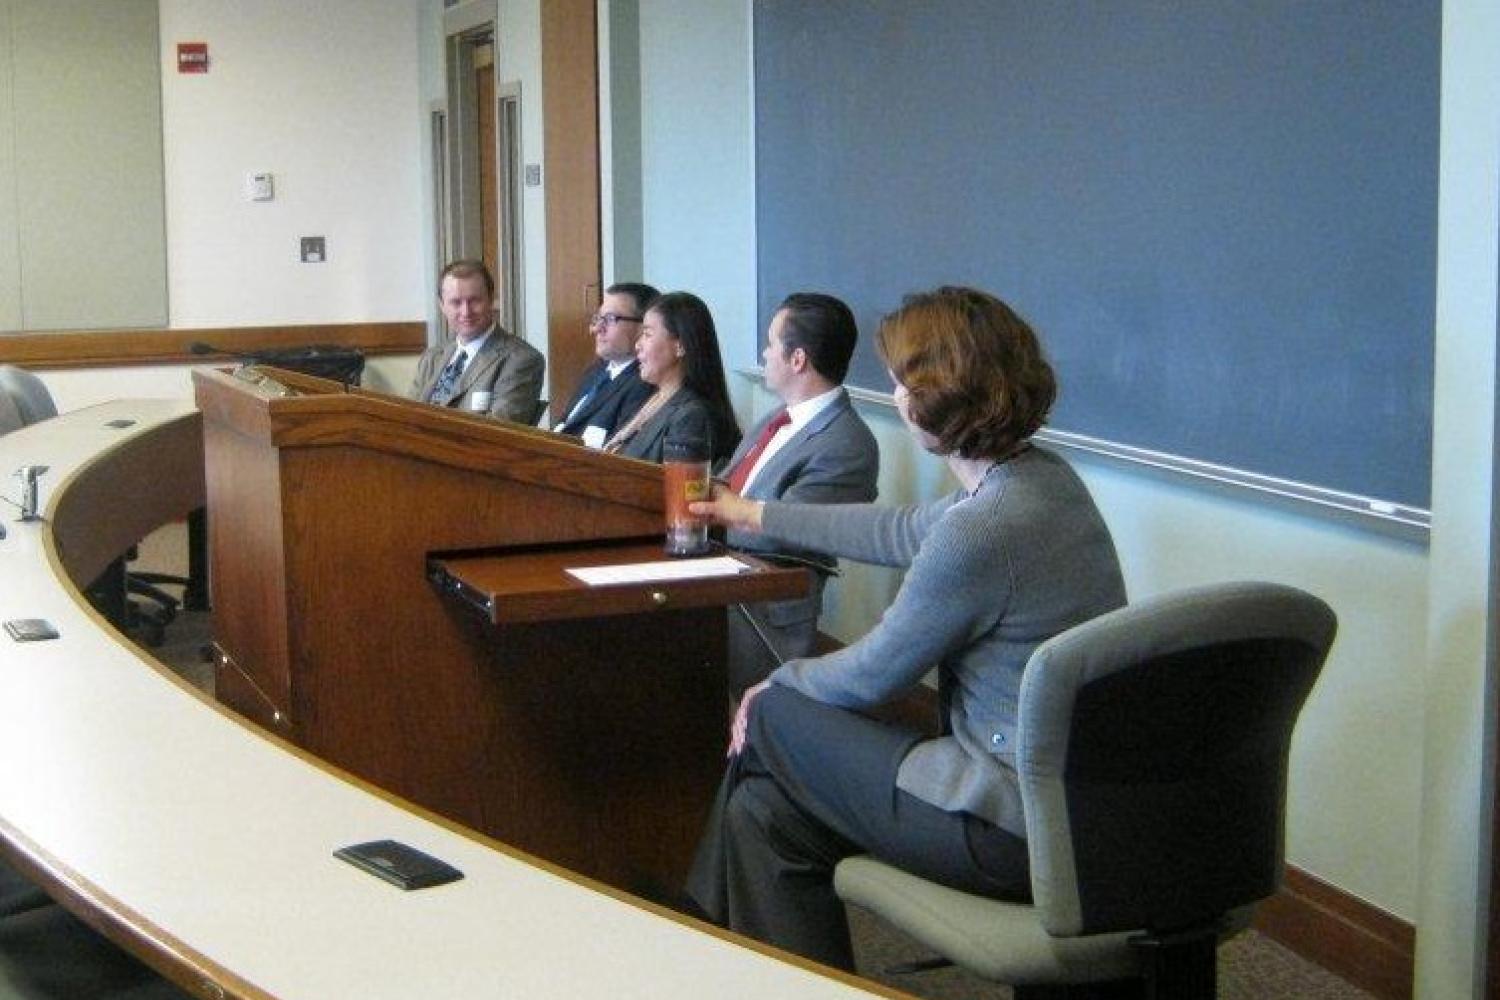 Judge John Madden (Denver District Court), Zach Carlyle (U.S. SEC), Misae Nishikura (Holland & Hart), and Dan McCormick (Kilpatrick Townsend) speak at the Interviewing Tips and Techniques Panel while Jennifer Winslow moderates.